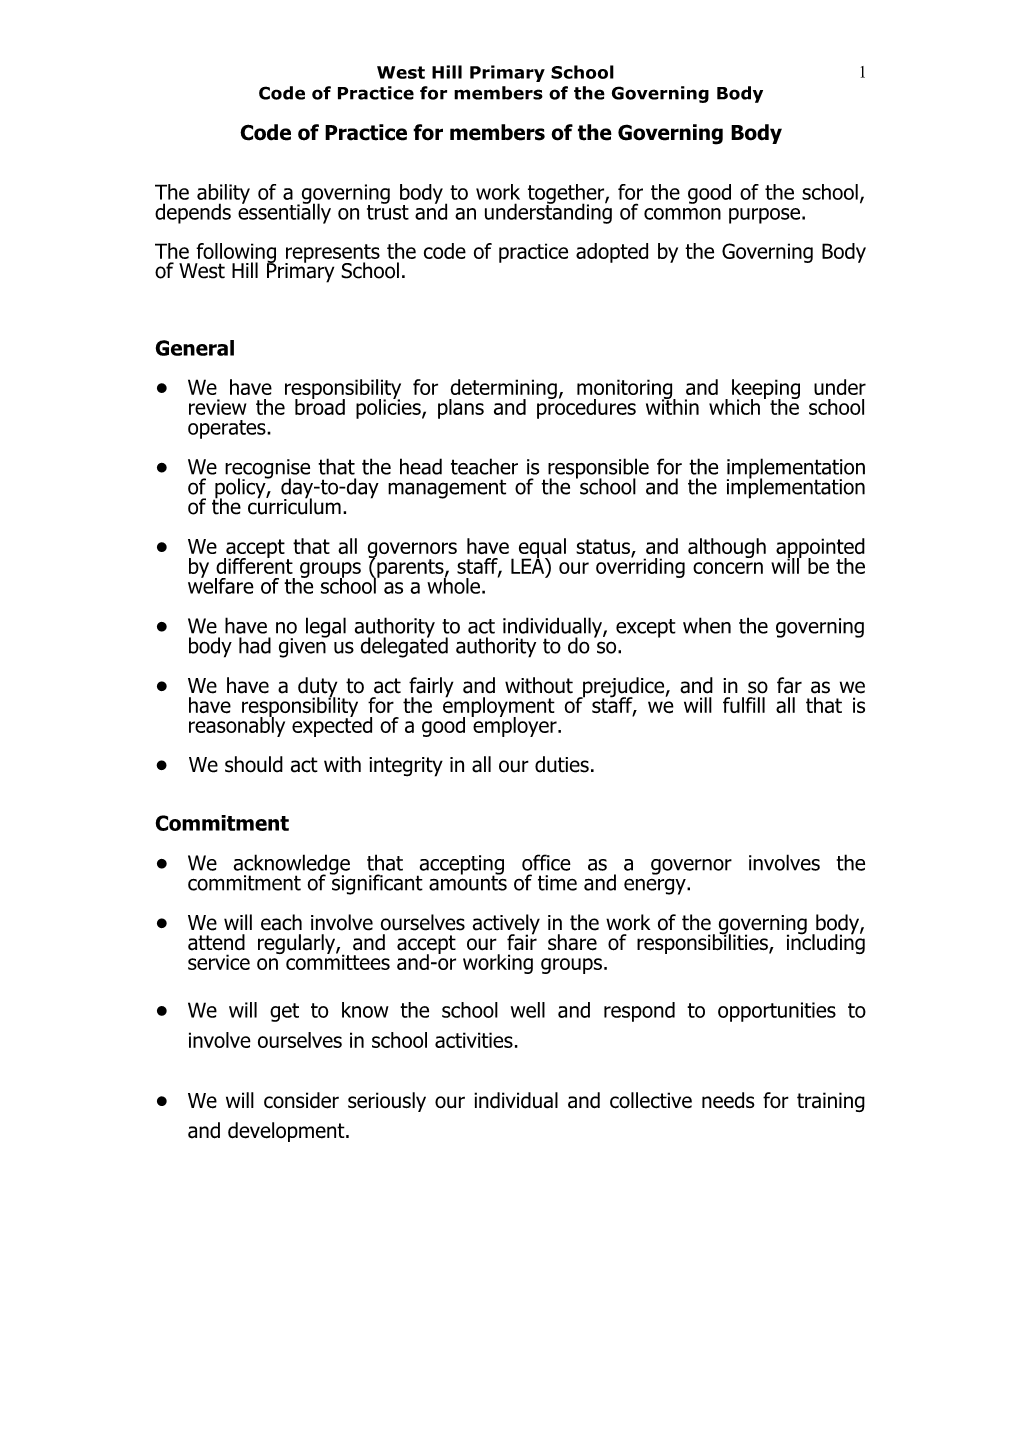 Code of Practice for Members of the Governing Body